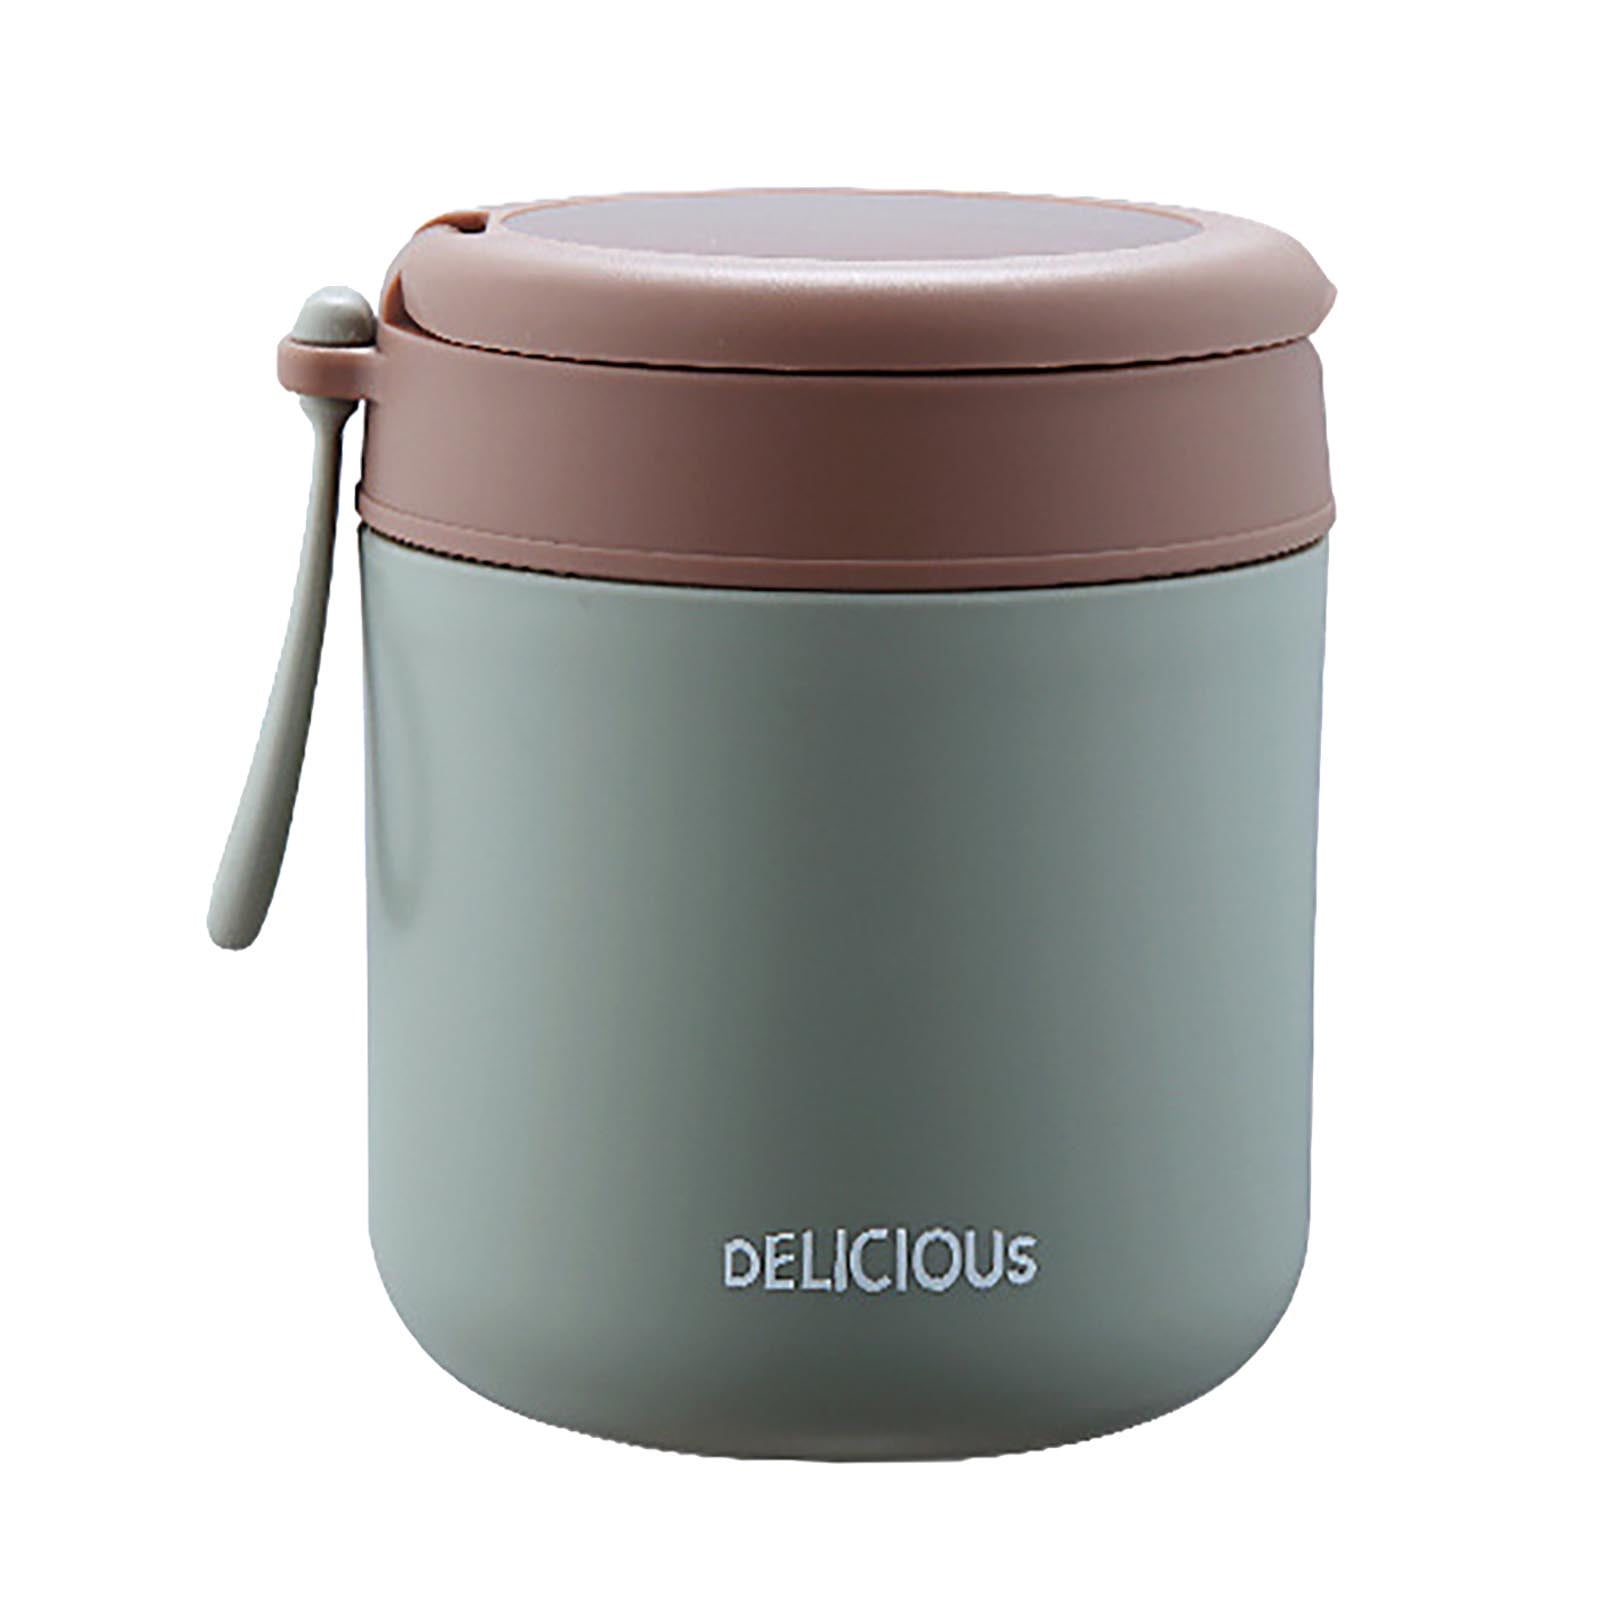 Hot Food Flask Stainless Steel Lunch Box Thermos Vacuum Insulated Trave  Portable